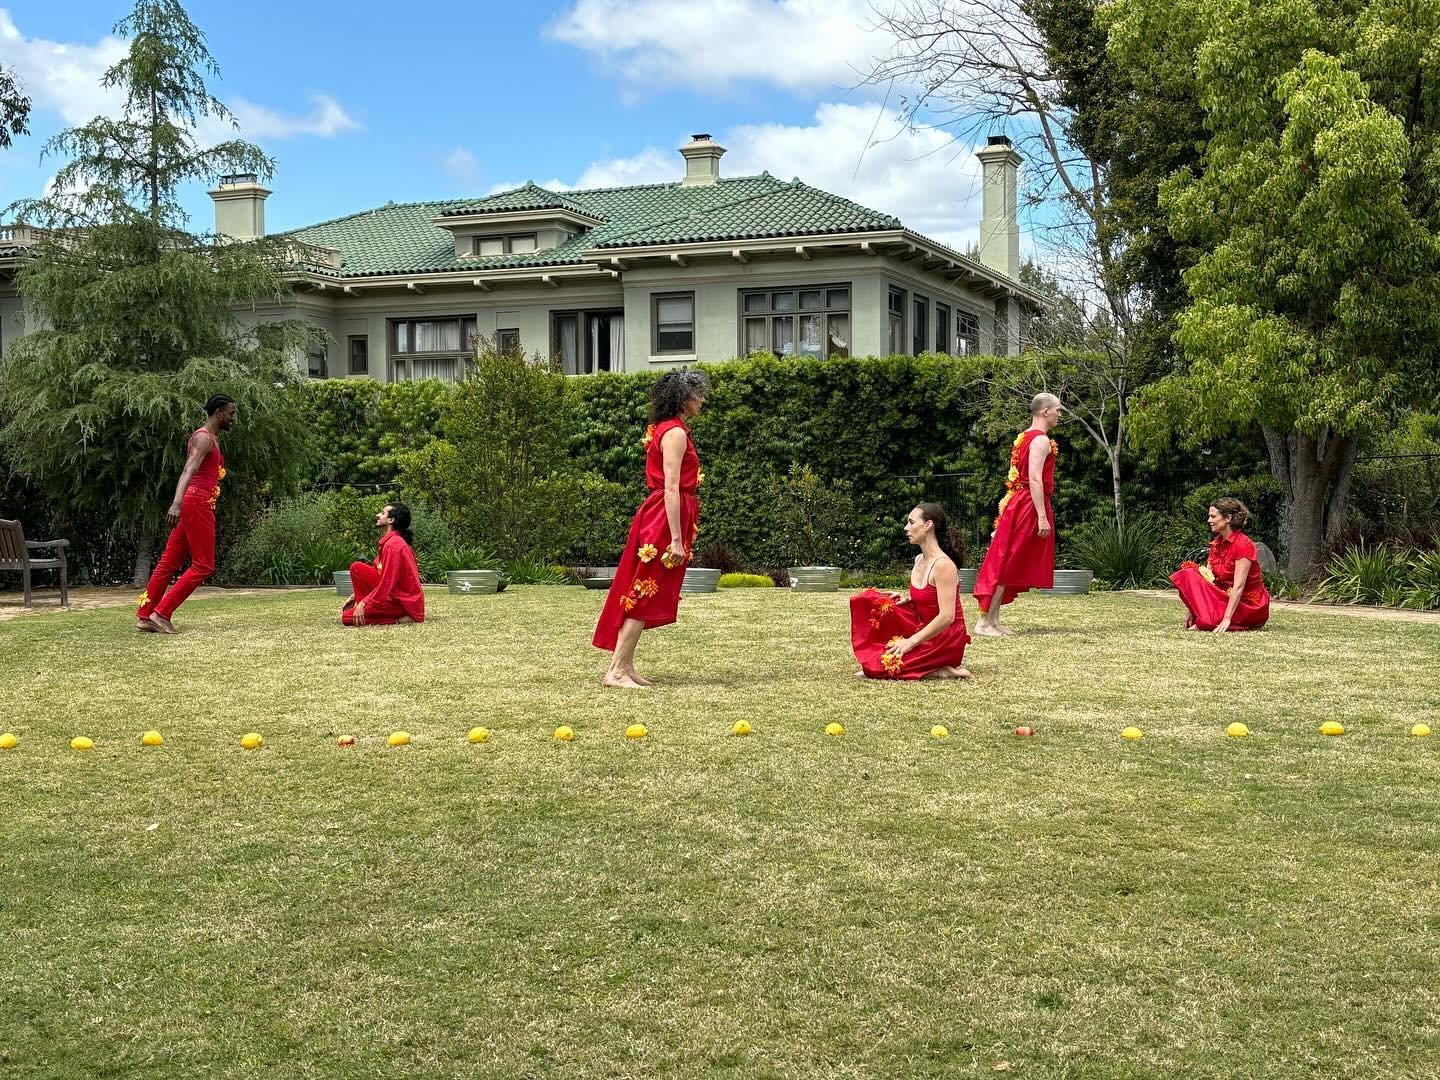 We&rsquo;re having a wonderful original, site-specific dance event tomorrow at Meherabode outside on our beautiful grounds. The work is choreographed by longtime Baba lovers Sara Pearson and Patrik Widrig and performed by members of their company Pea